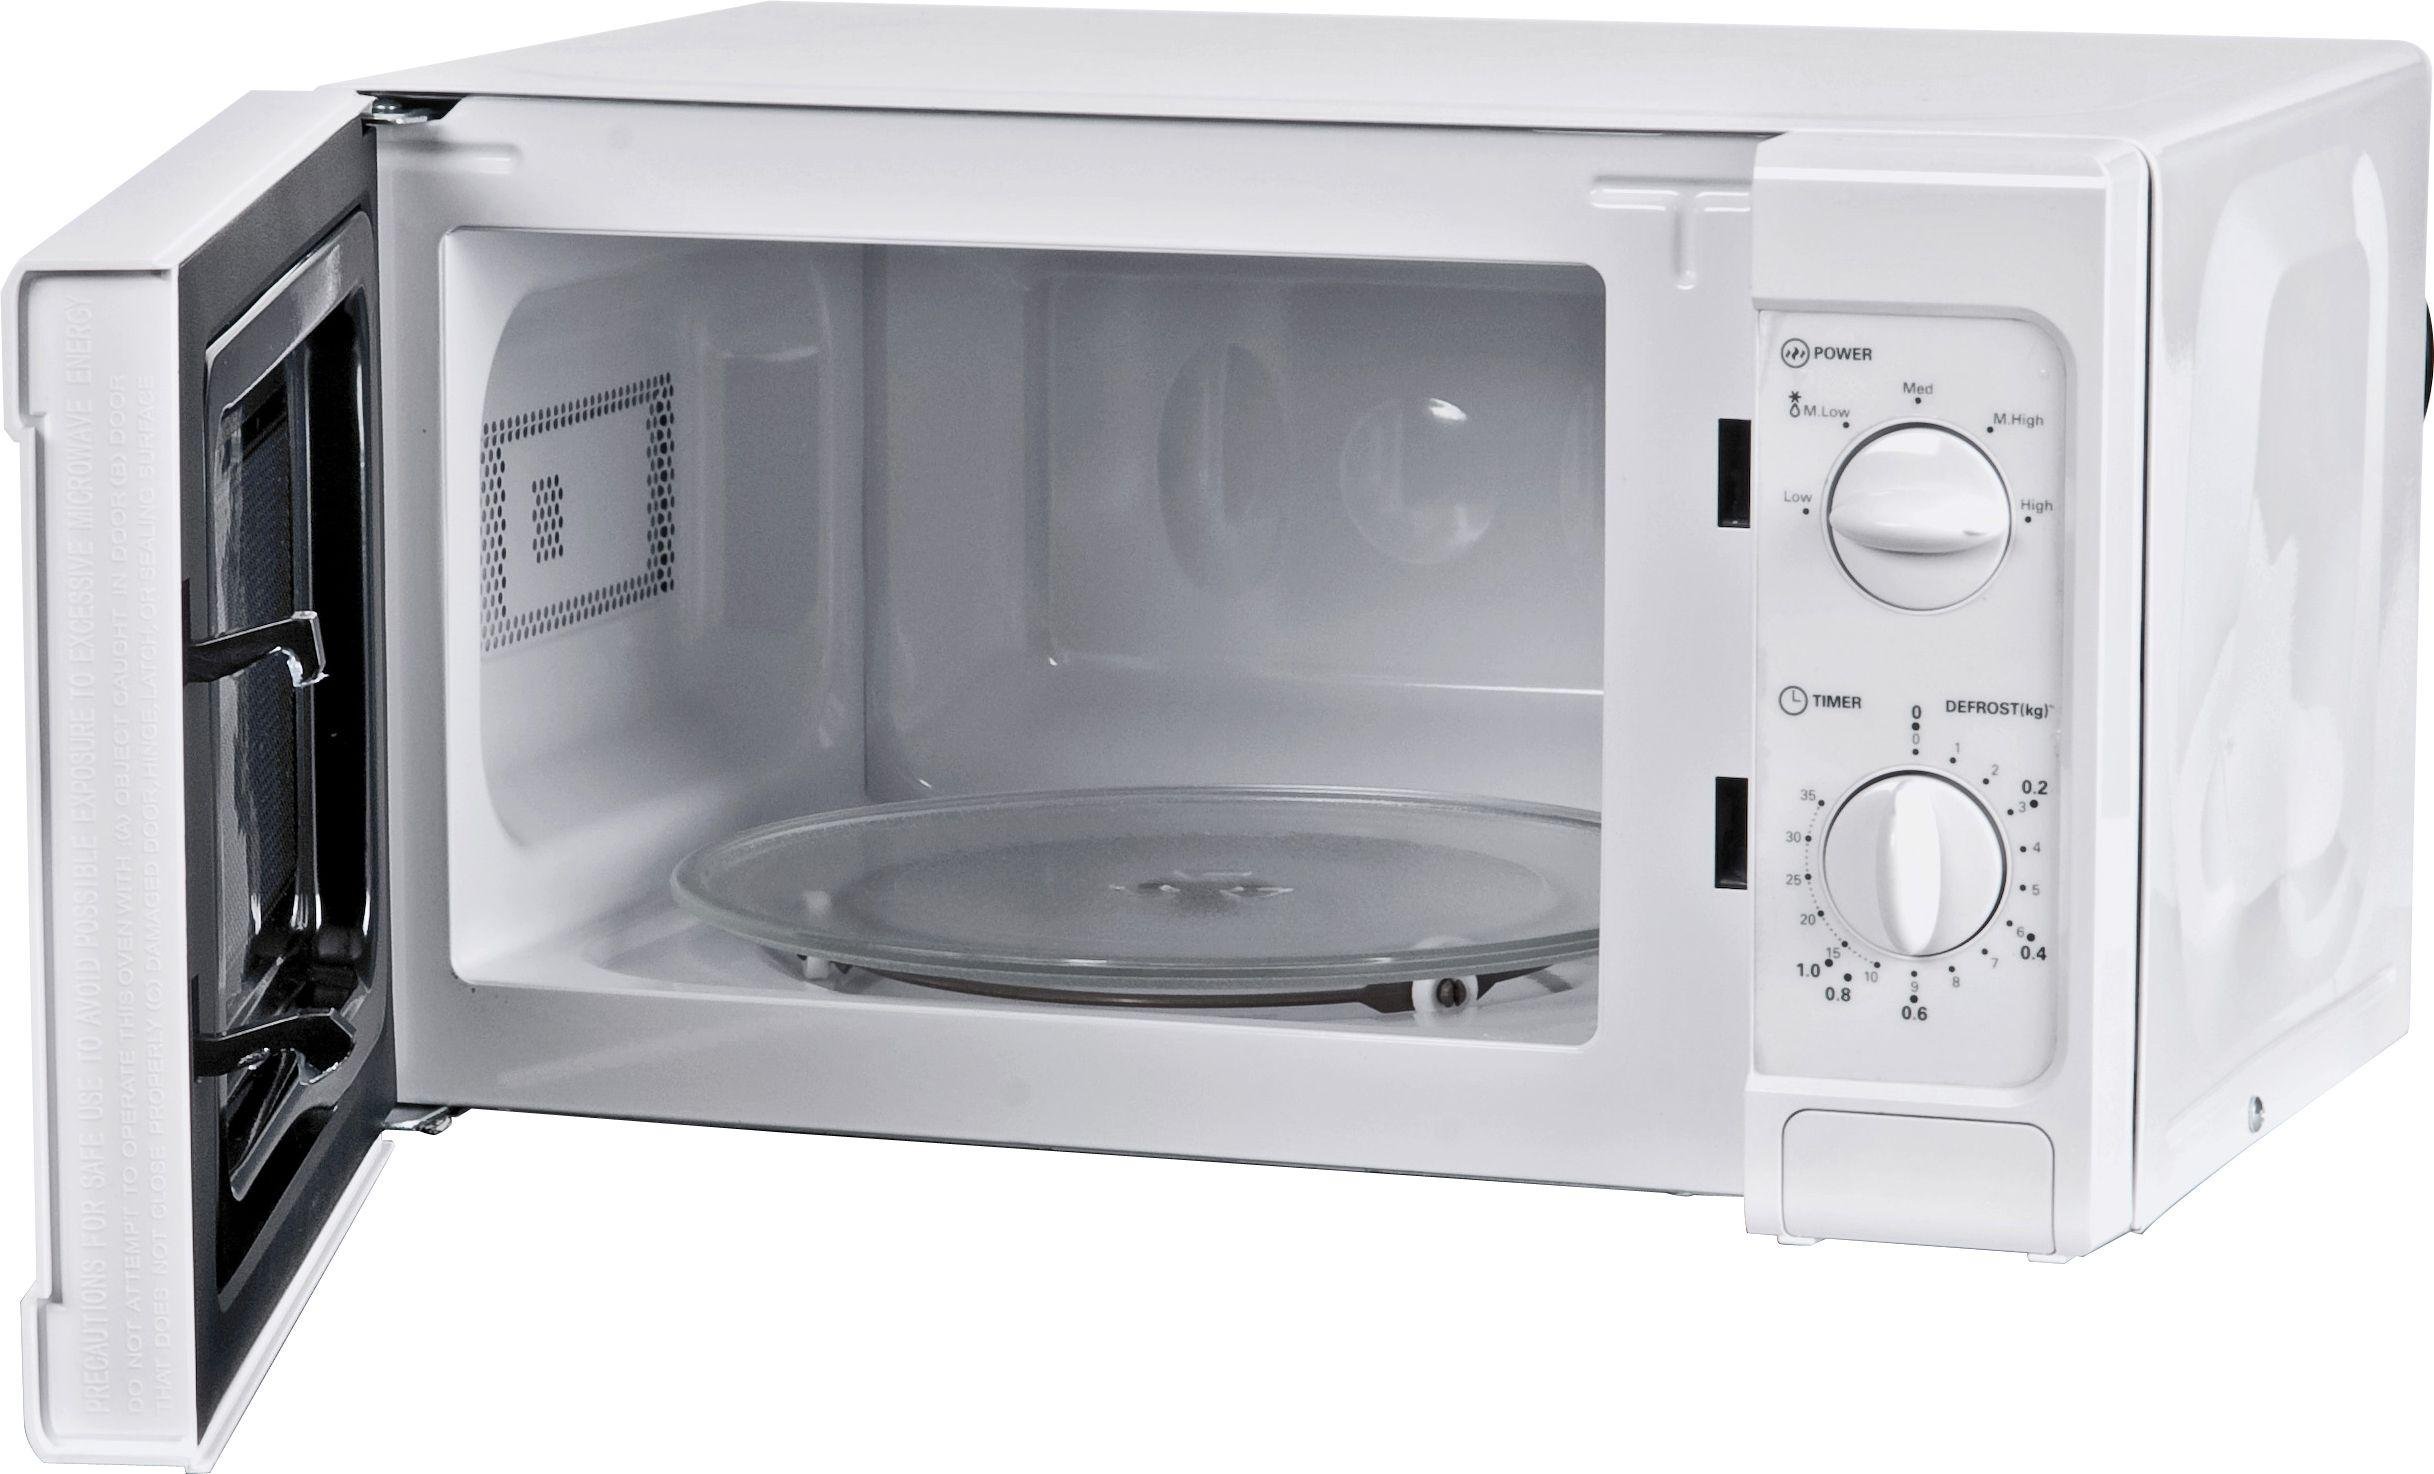 Simple Value by Argos -Microwave - MM717CNF Reviews